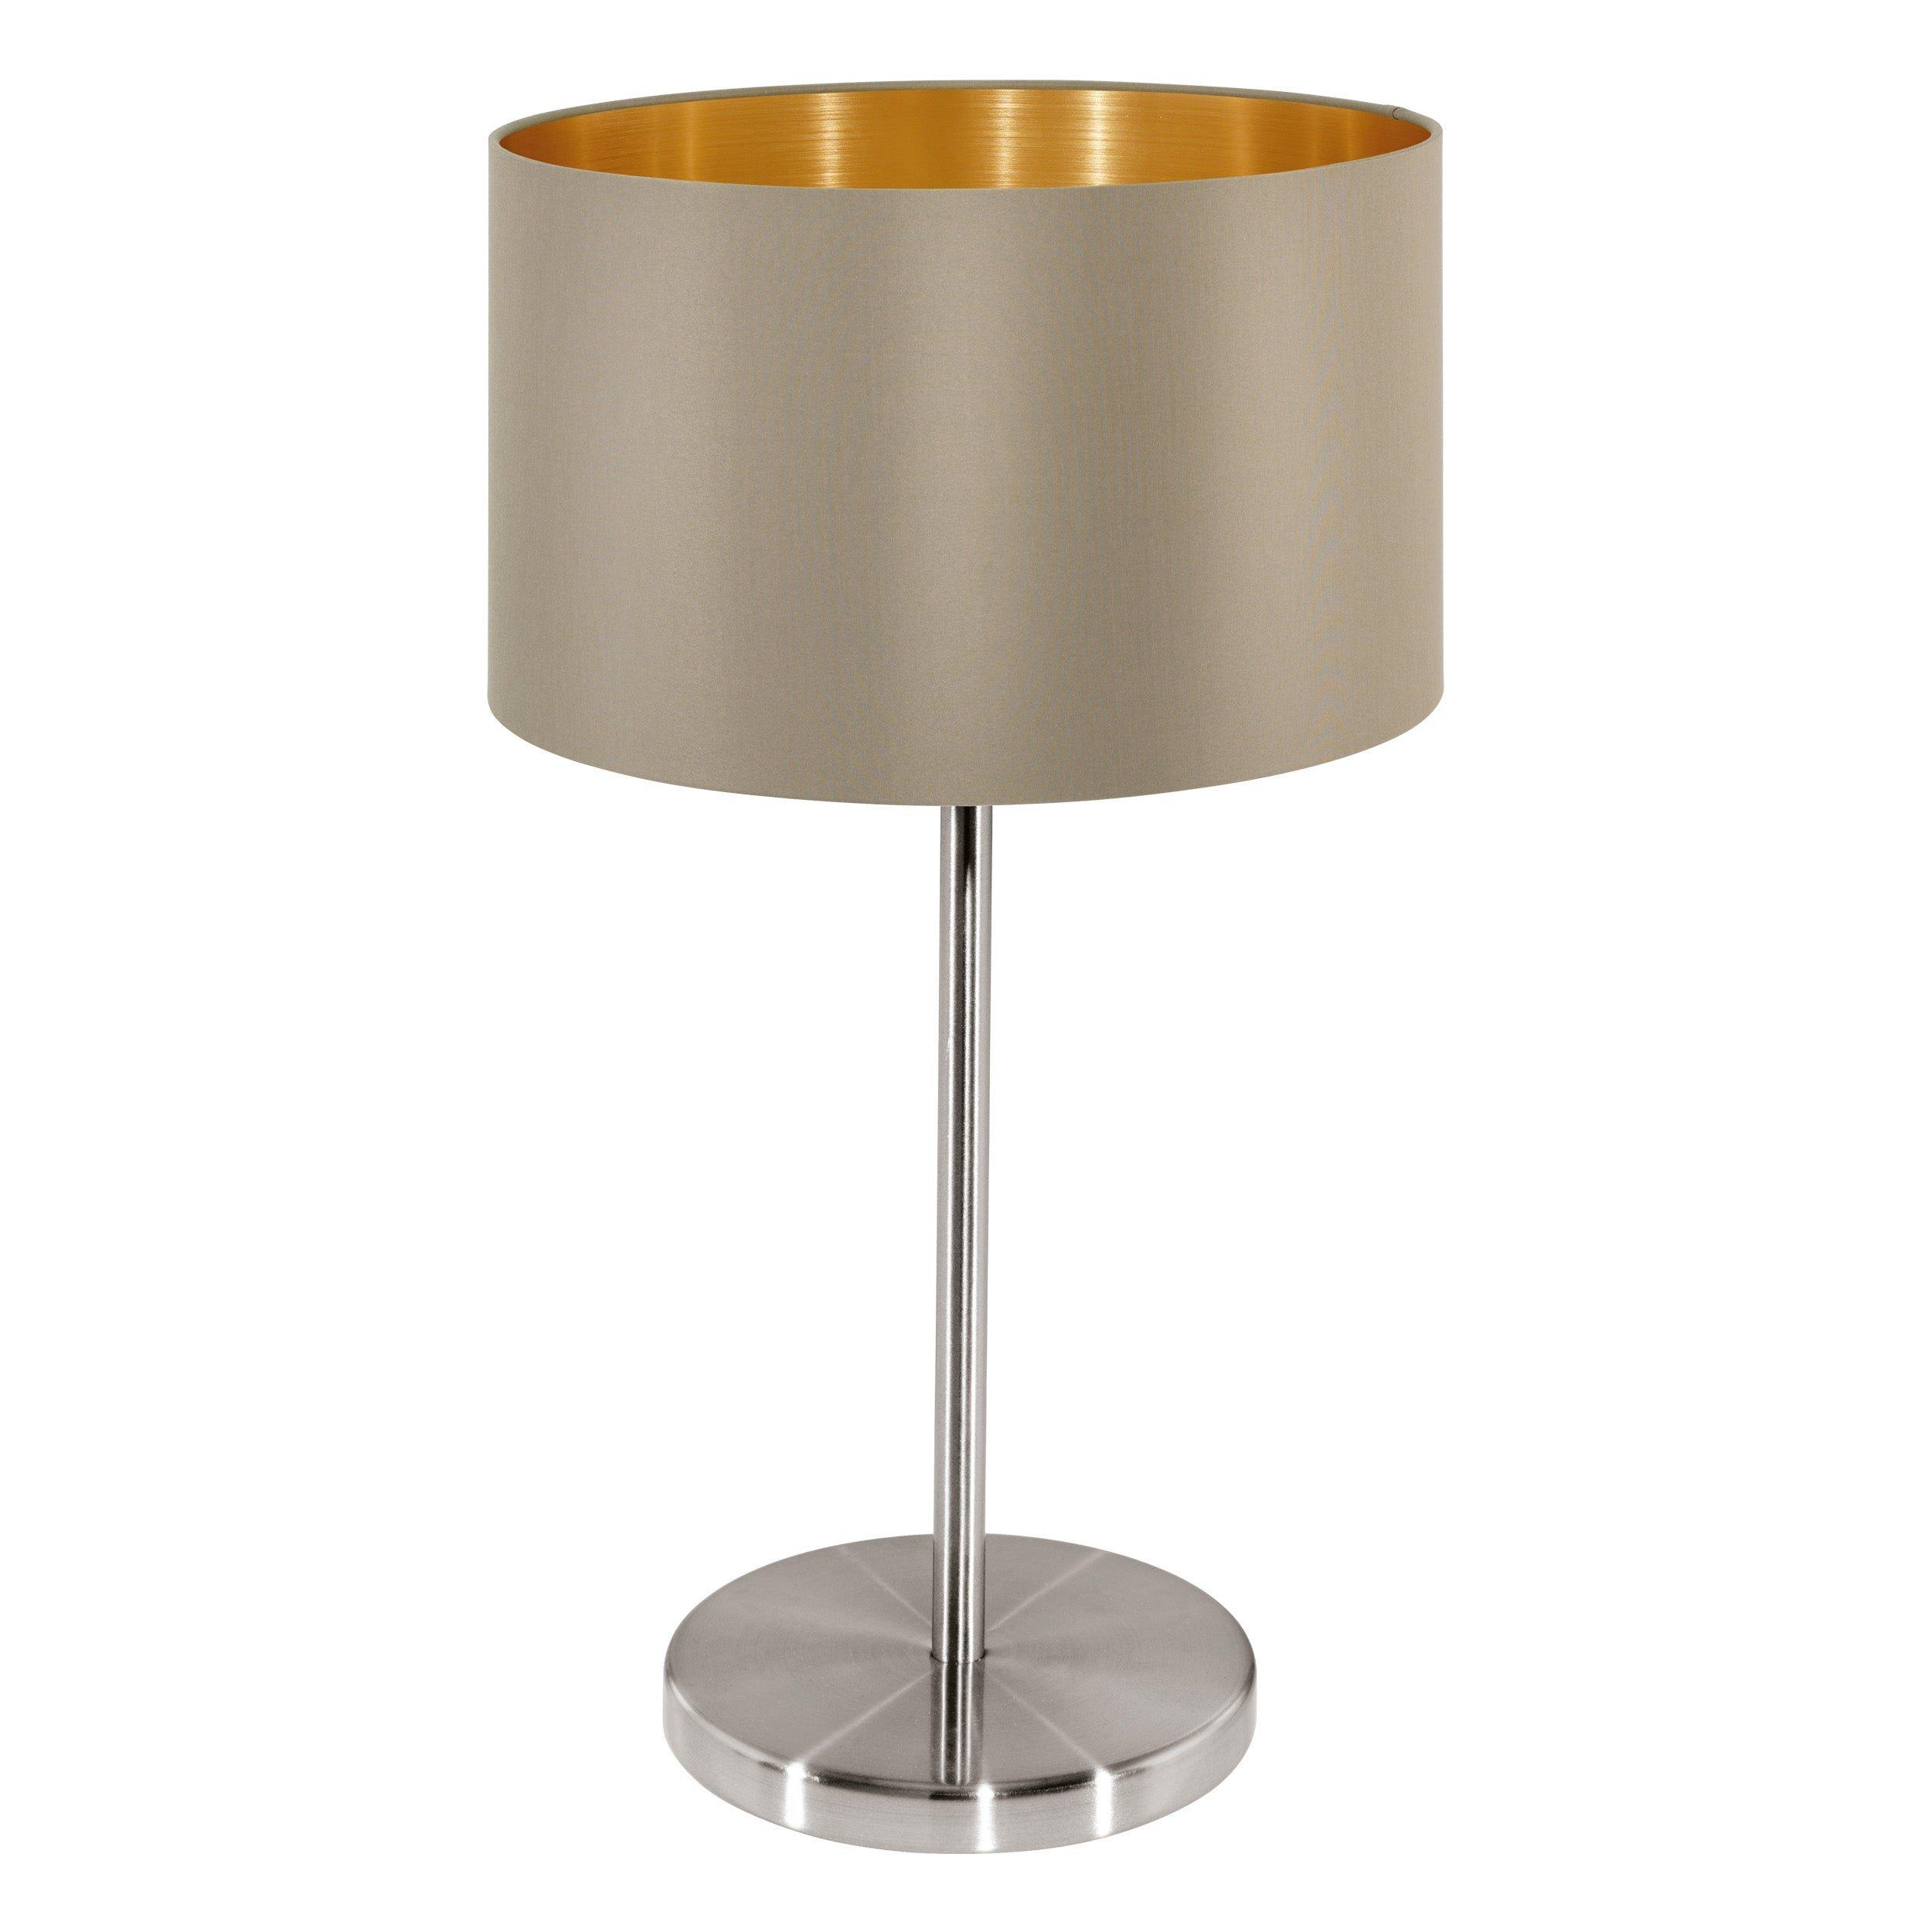 Table Lamp Colour Satin Nickel Steel Shade Taupe Gold Fabric Bulb E27 1x60W